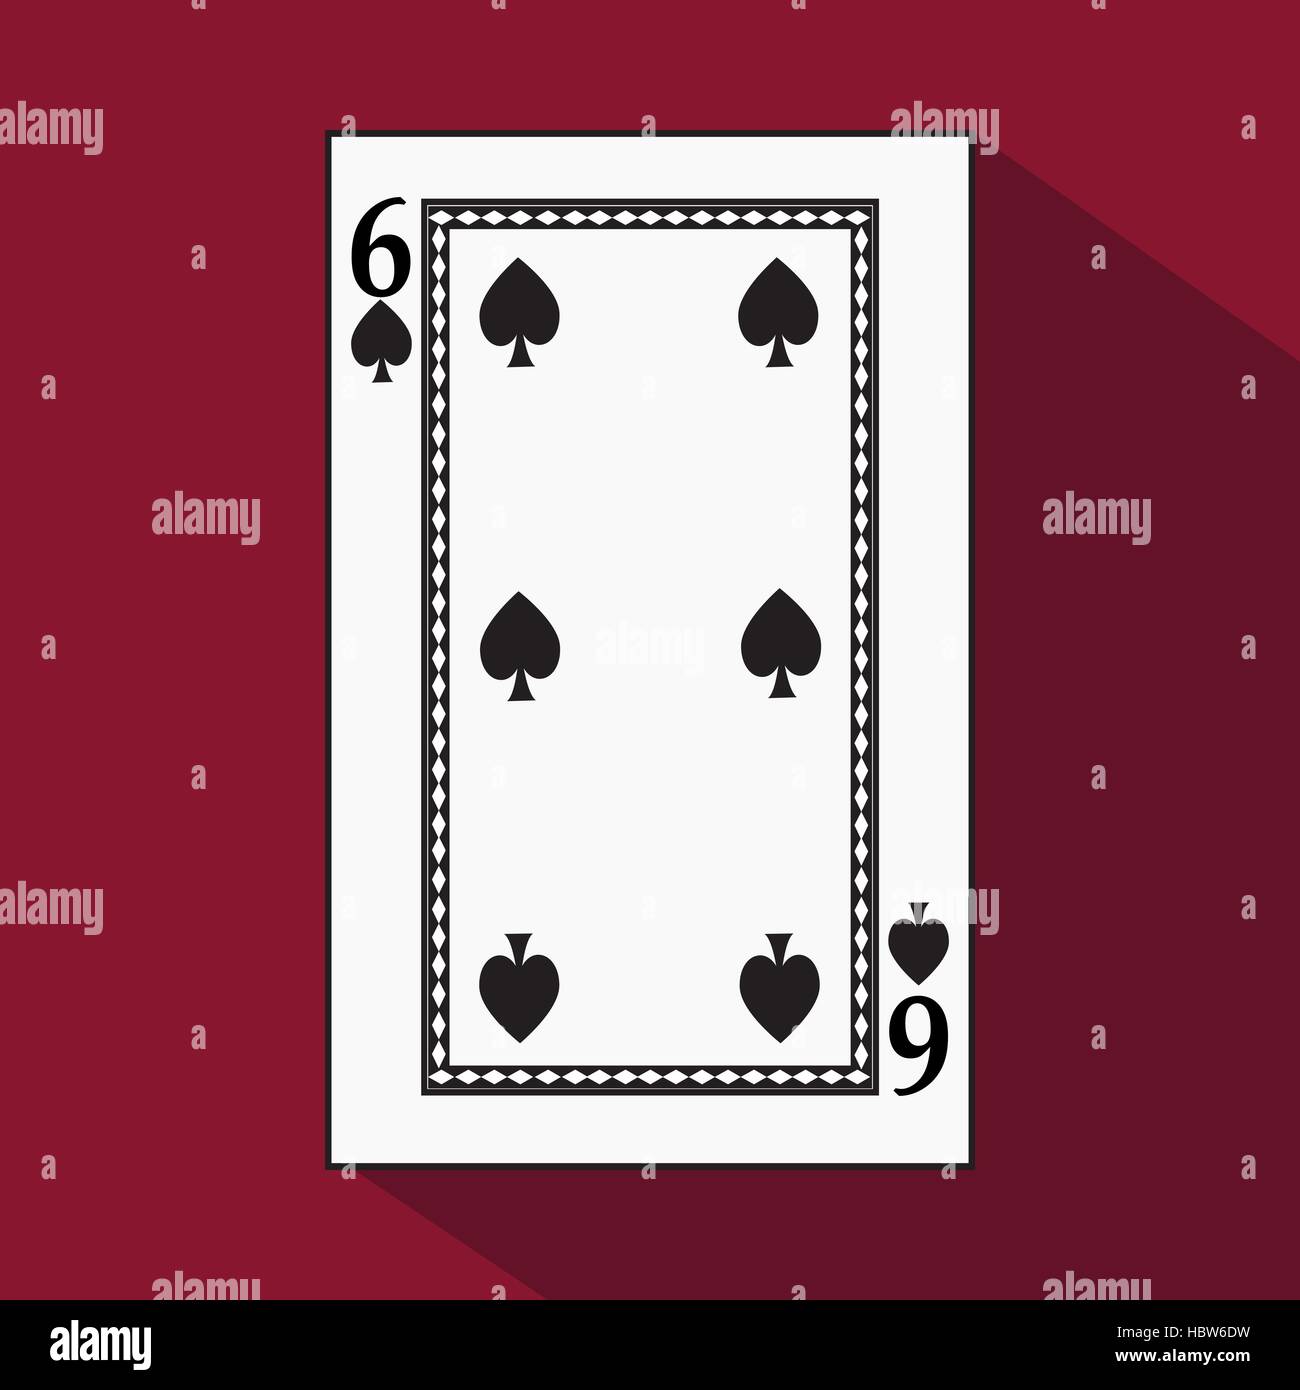 playing card. the icon picture is easy. peak spide 6 with white a basis substrate. a vector illustration on a red background. application appointment  Stock Vector